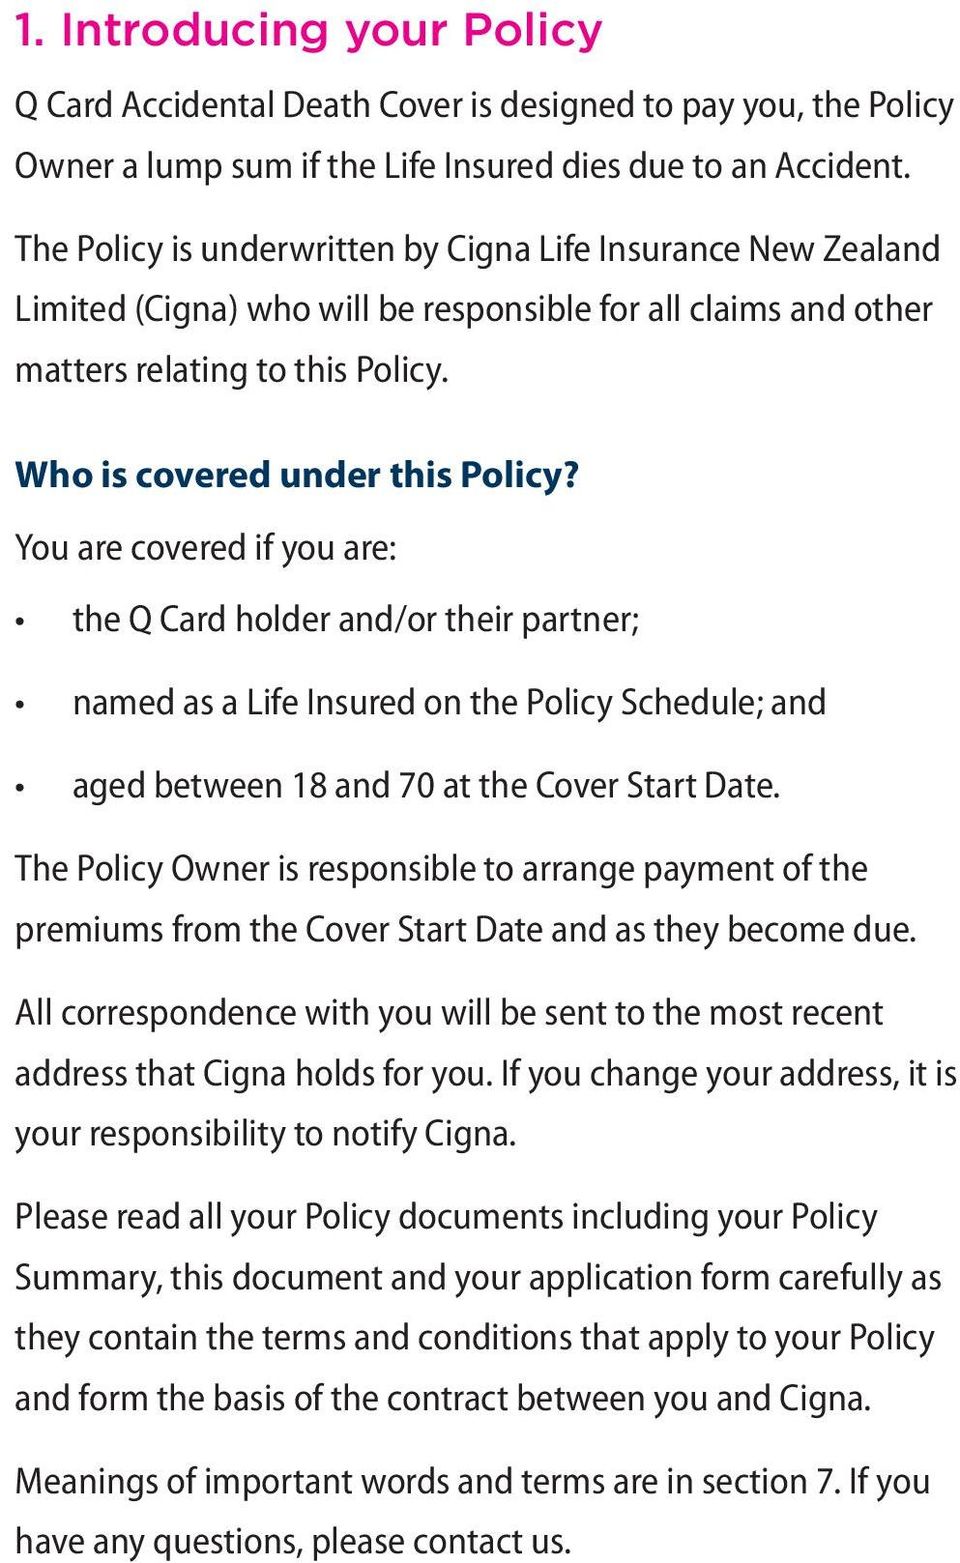 You are covered if you are: the Q Card holder and/or their partner; named as a Life Insured on the Policy Schedule; and aged between 18 and 70 at the Cover Start Date.